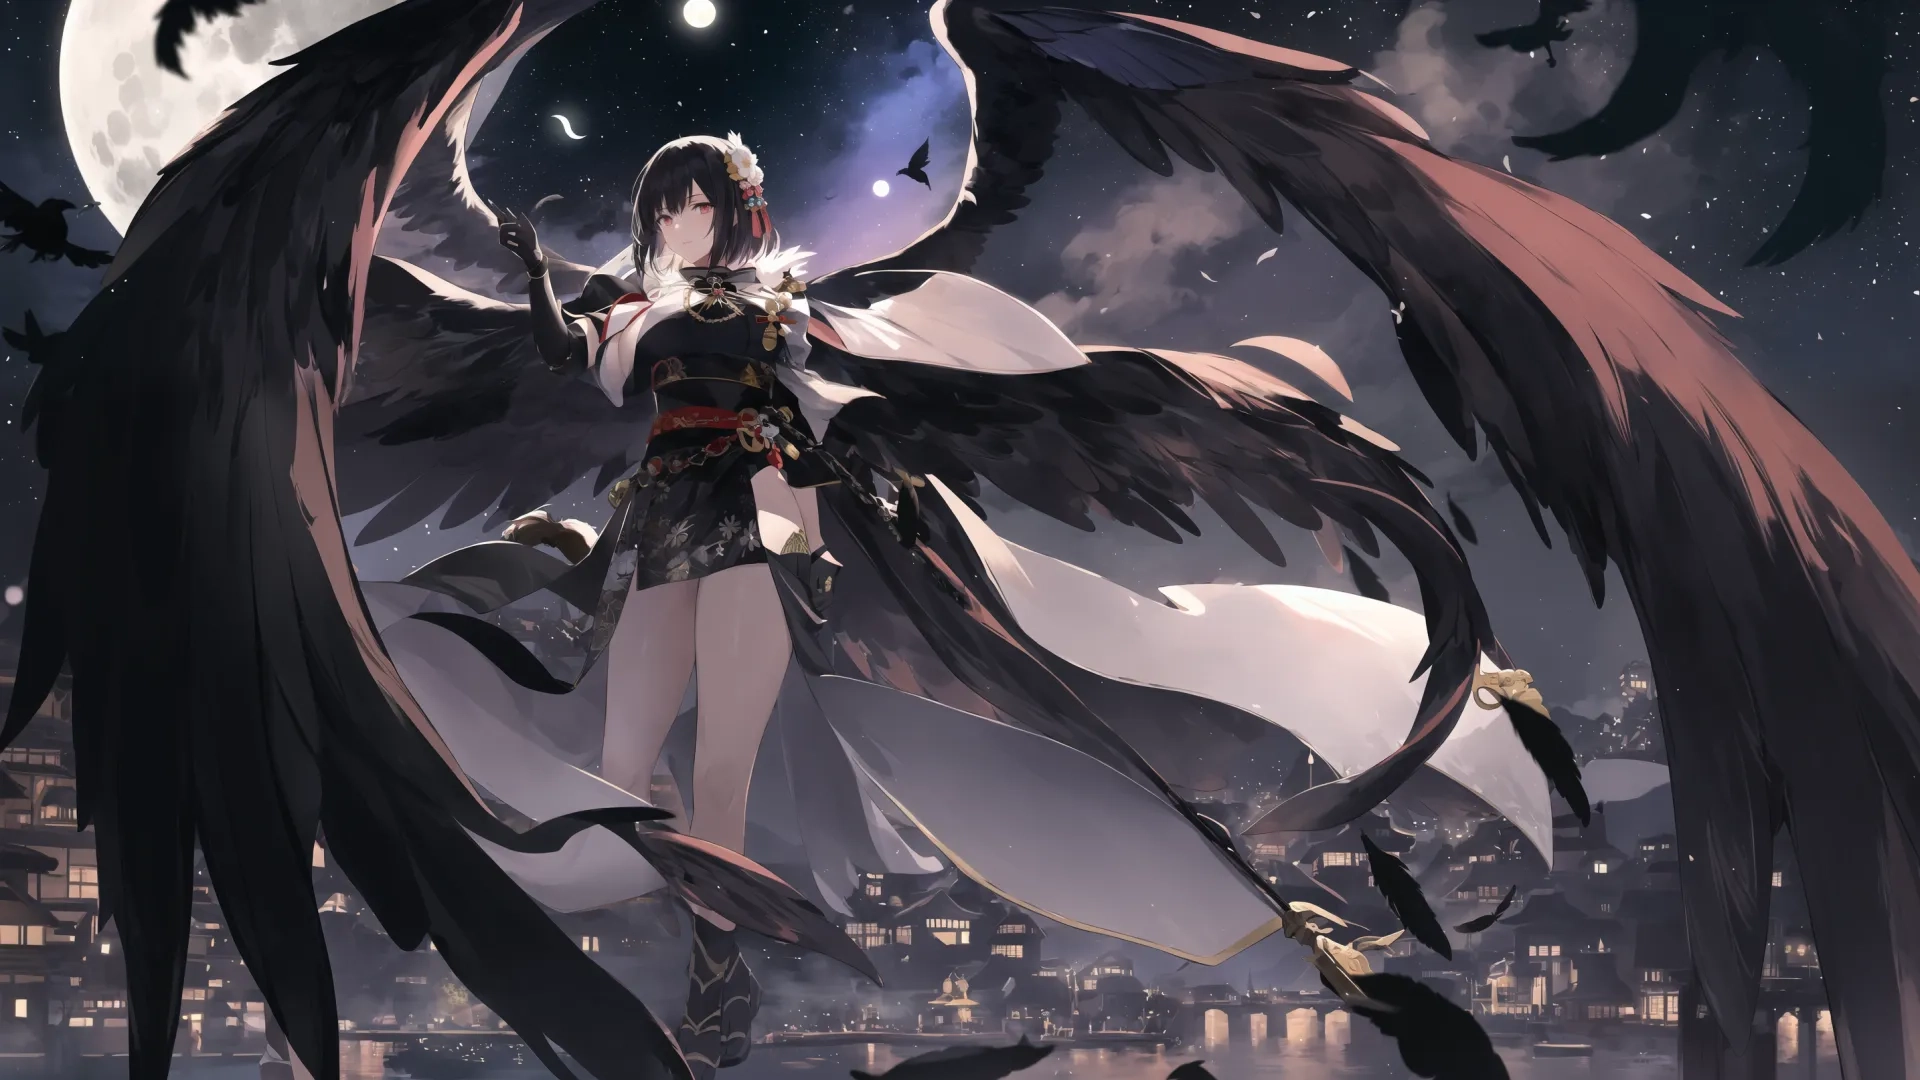 woman with wings flying over a city at night under full moony sky and a full moon in the background above water with birds around her
